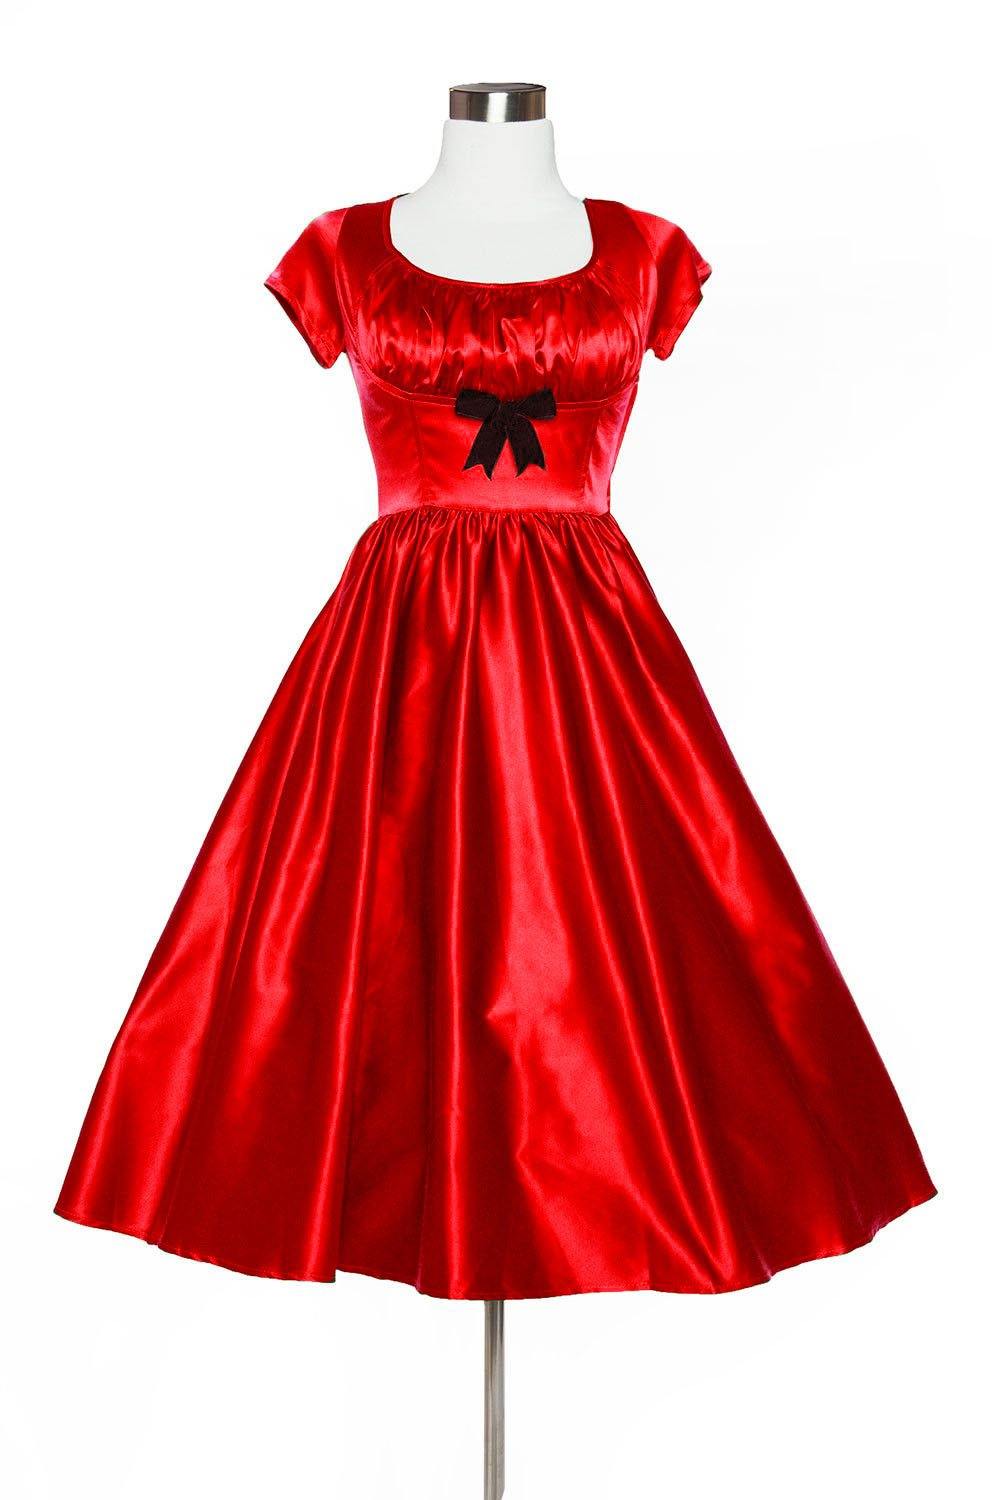 Evelyn Vintage Cocktail Dress in Red Bridal Satin | Pinup Couture - pinupgirlclothing.com